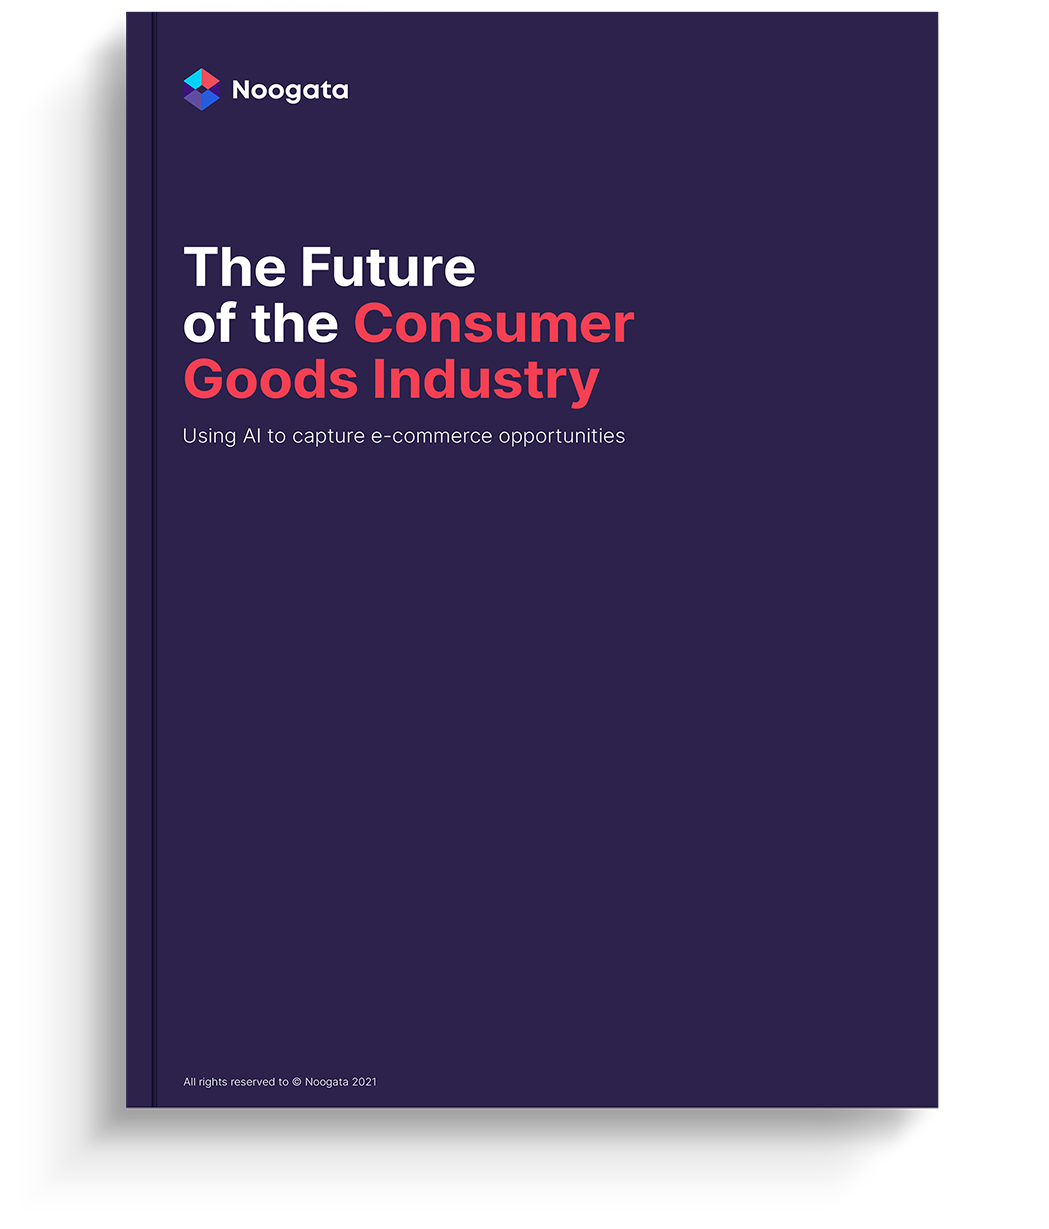 Future-of-the-Consumer-Goods-Industry-2